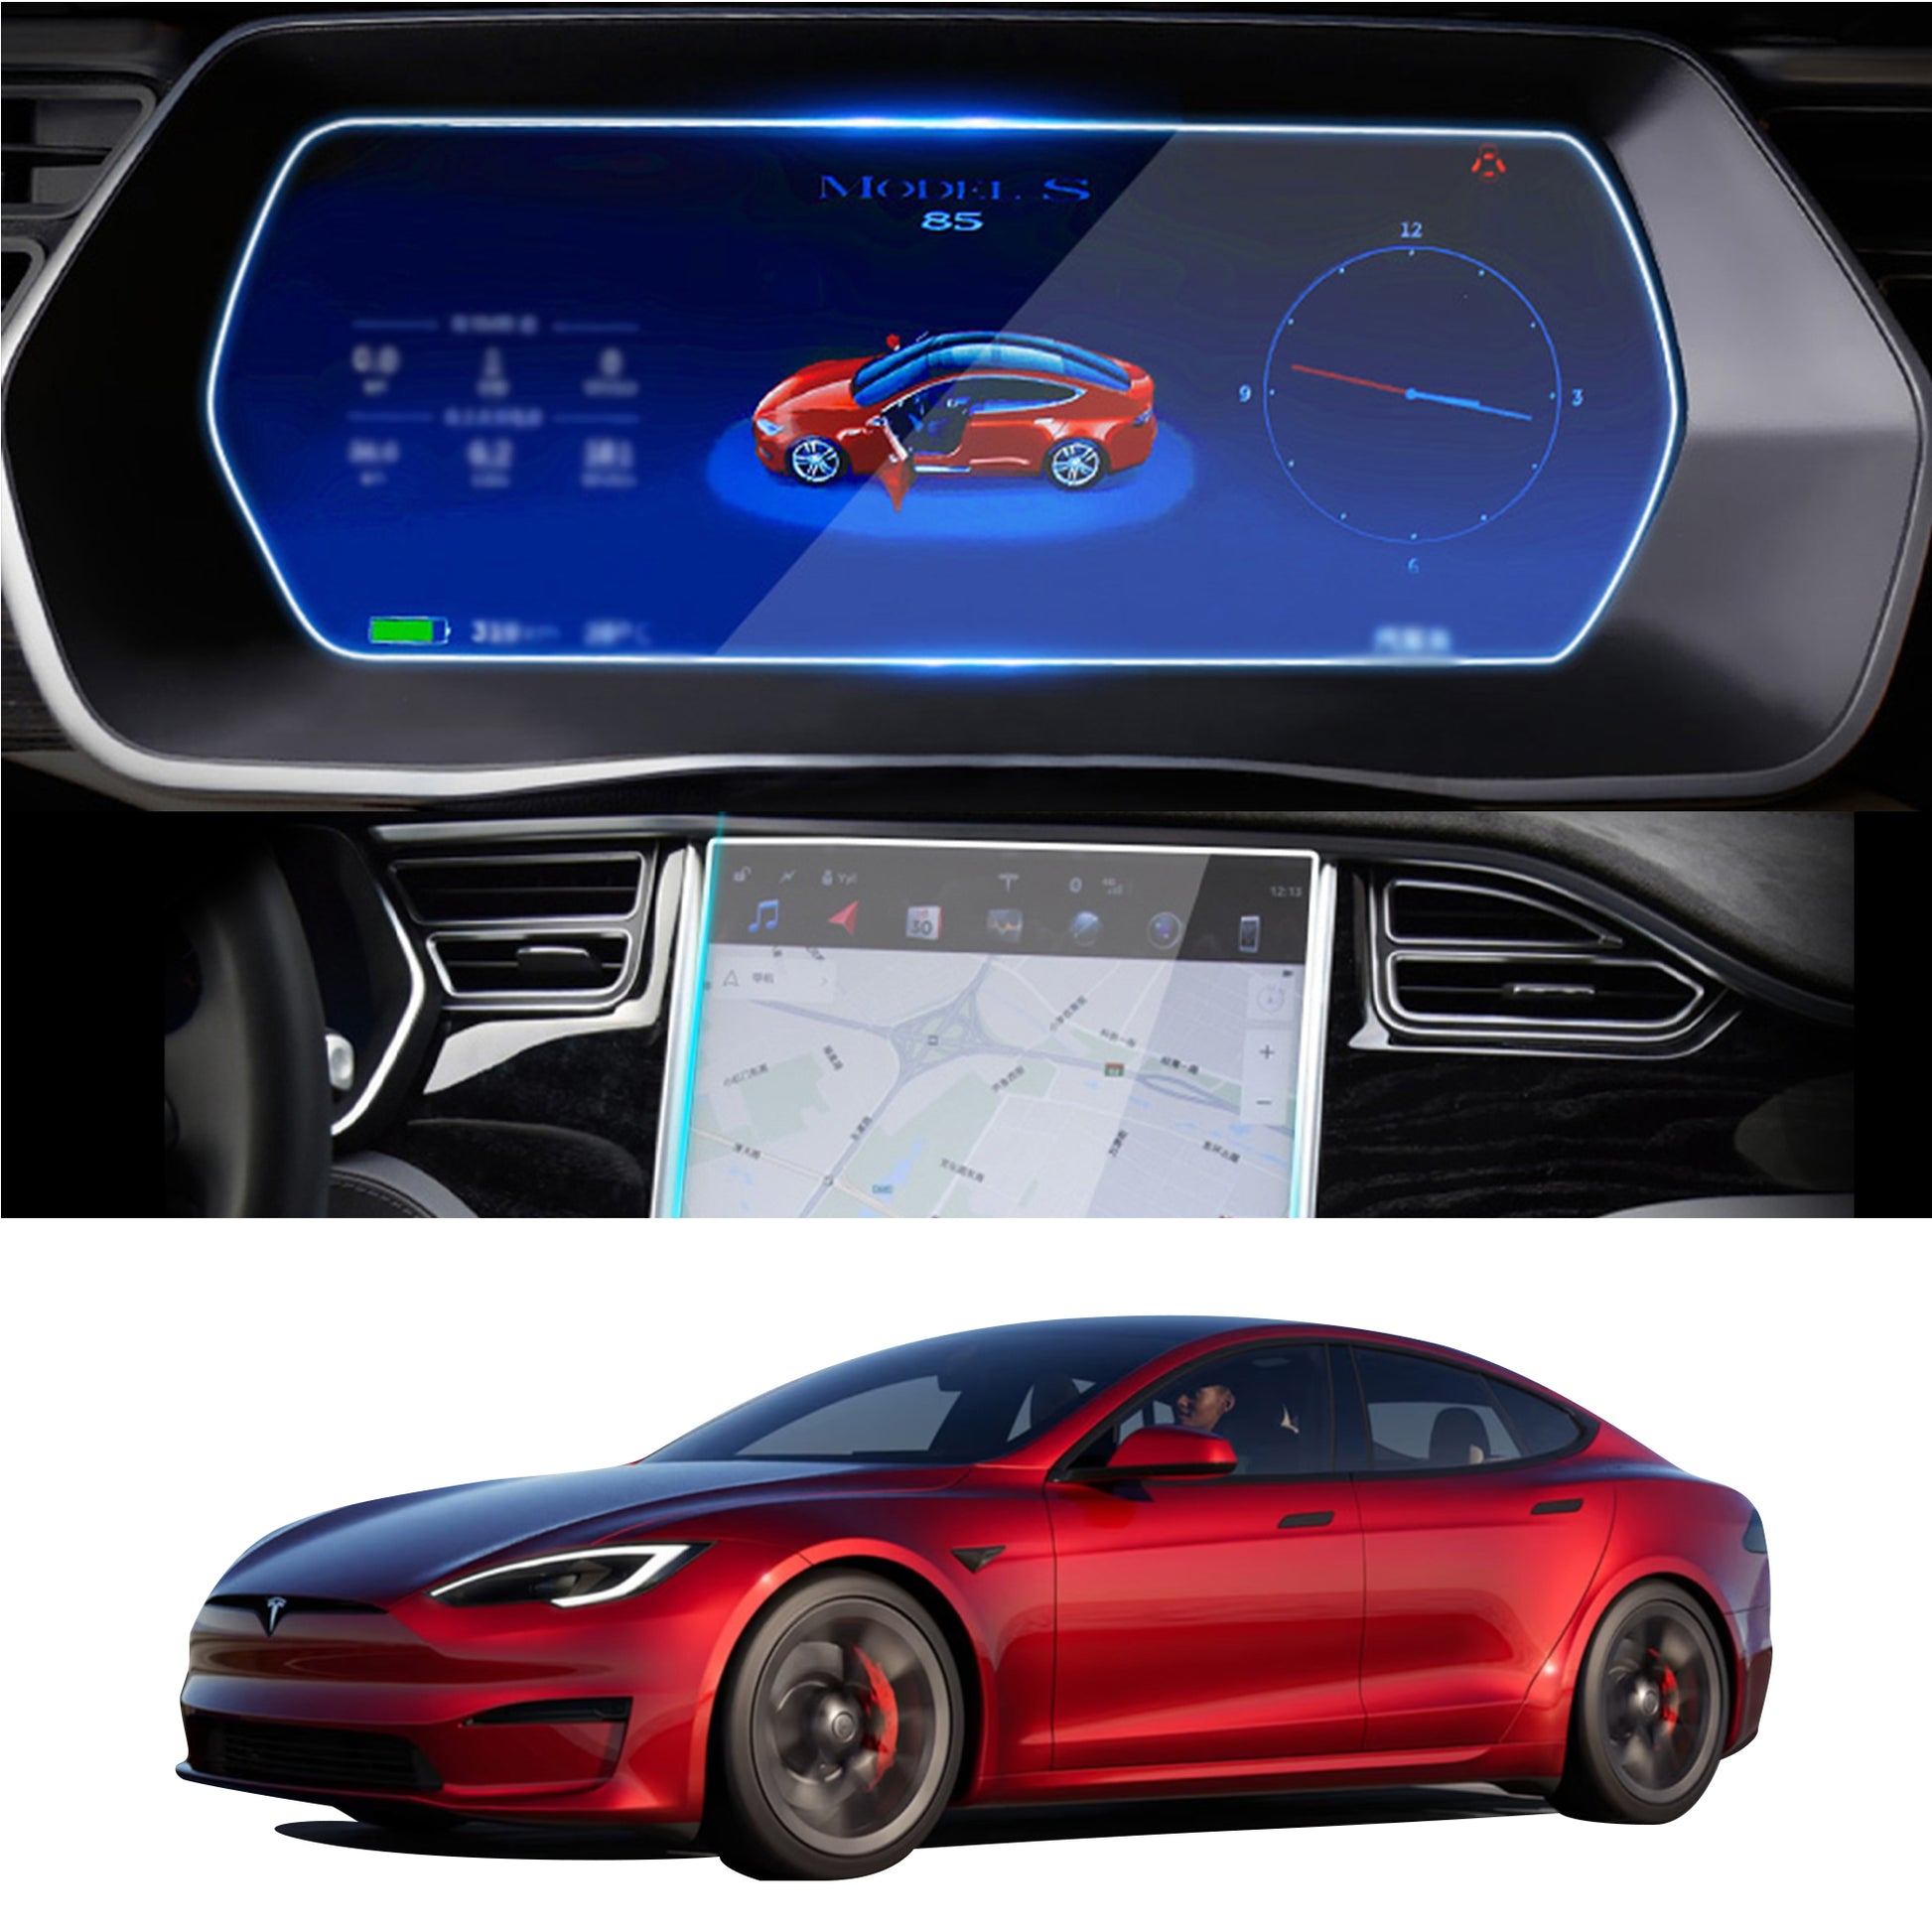 Screen Protector for Model S/X Dashboard and Center Control